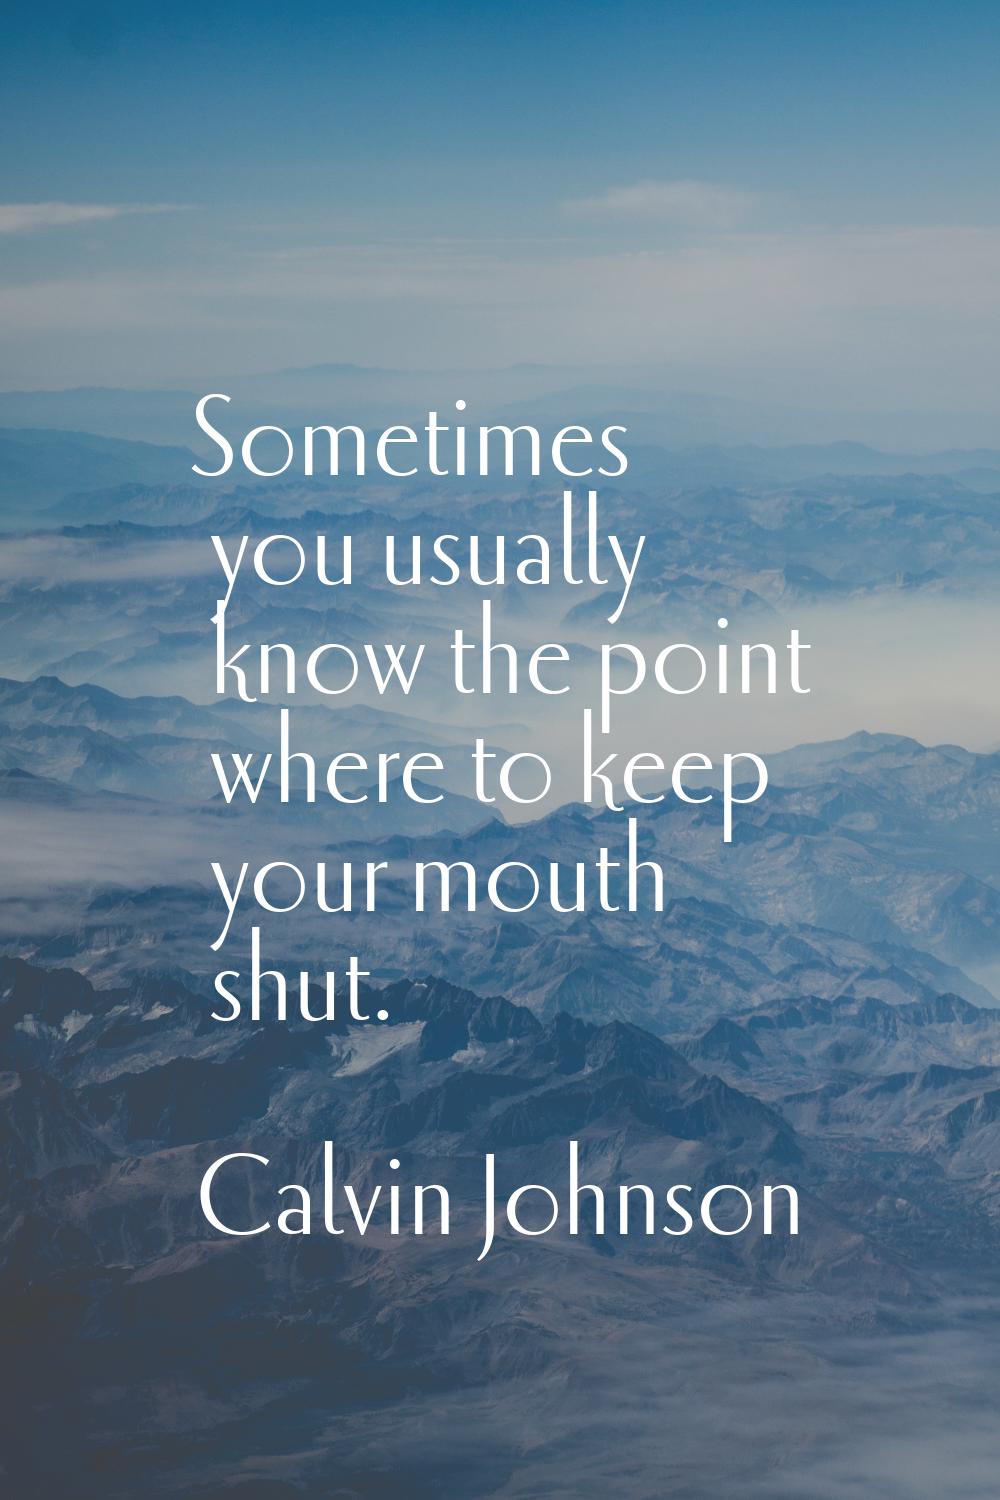 Sometimes you usually know the point where to keep your mouth shut.